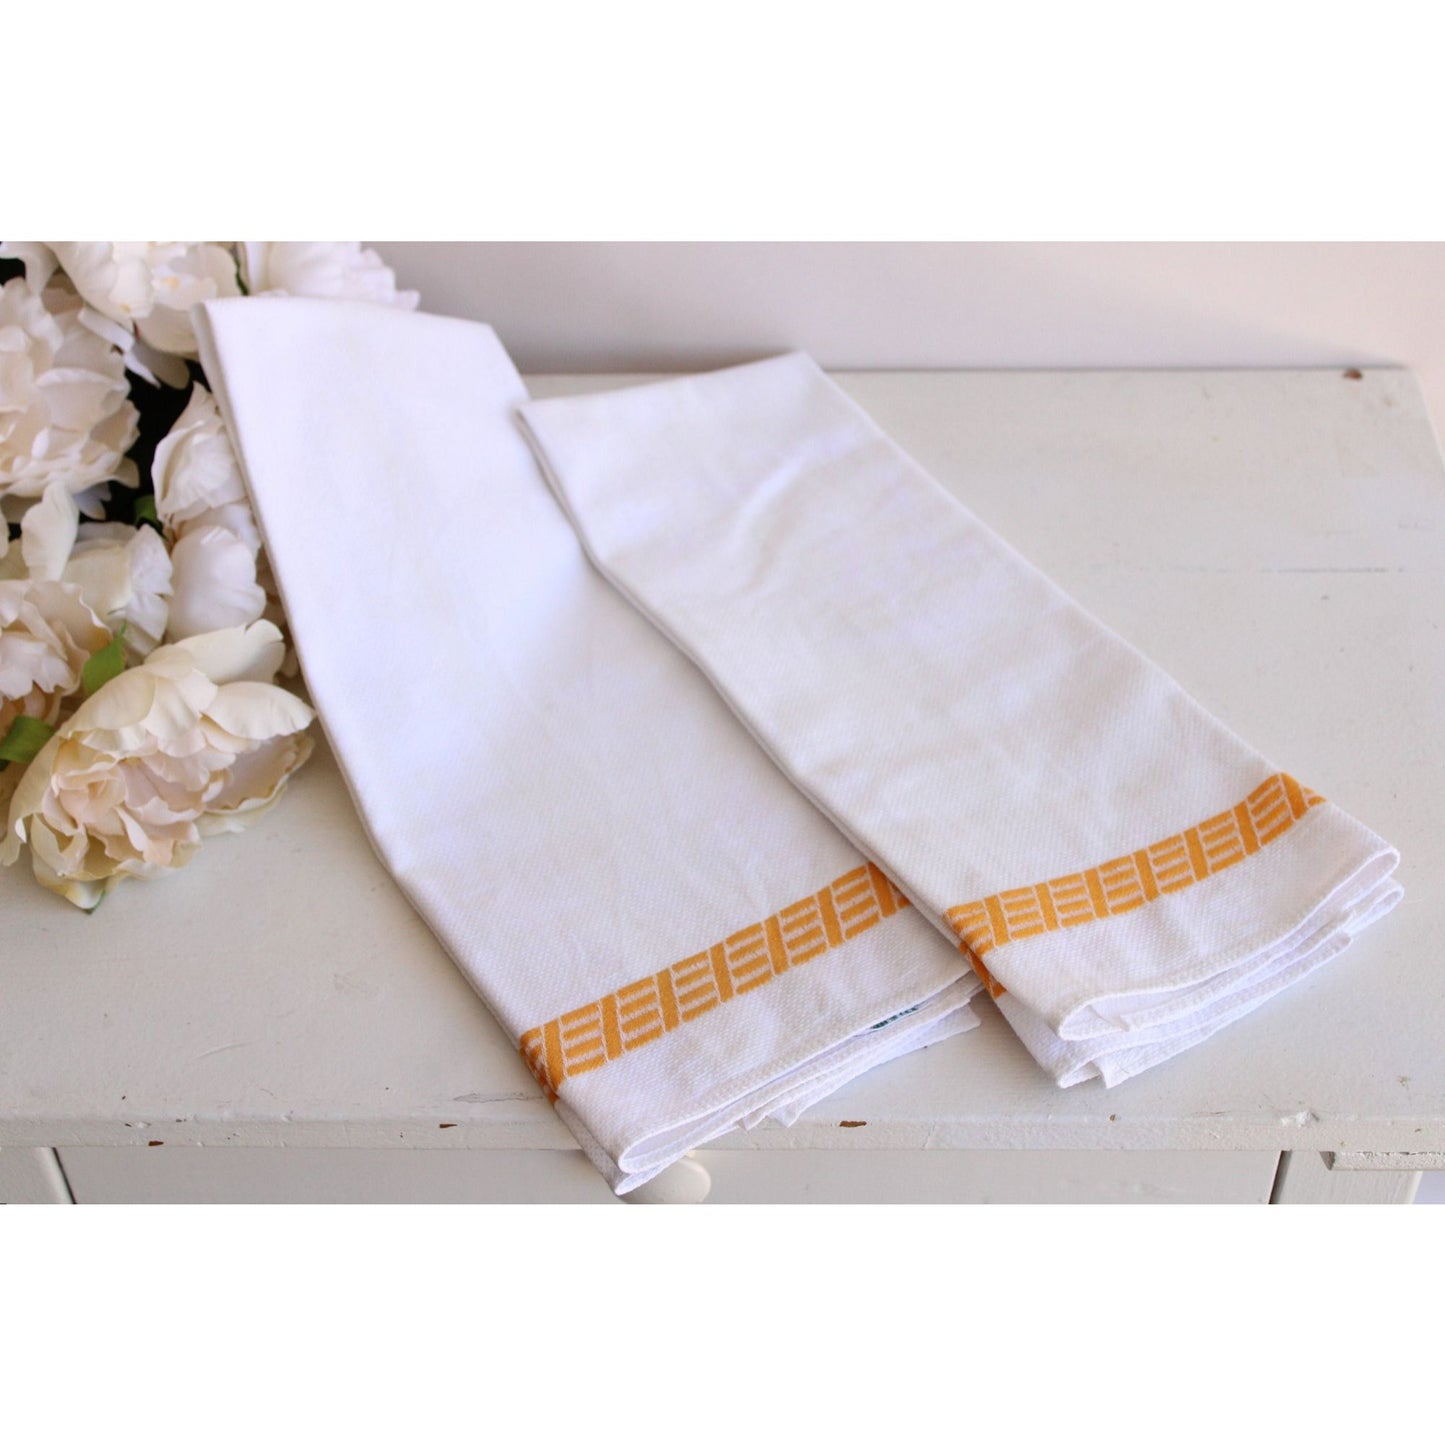 Vintage 1960s Pair of White Linen Damask Handtowels withYellow Embroidery